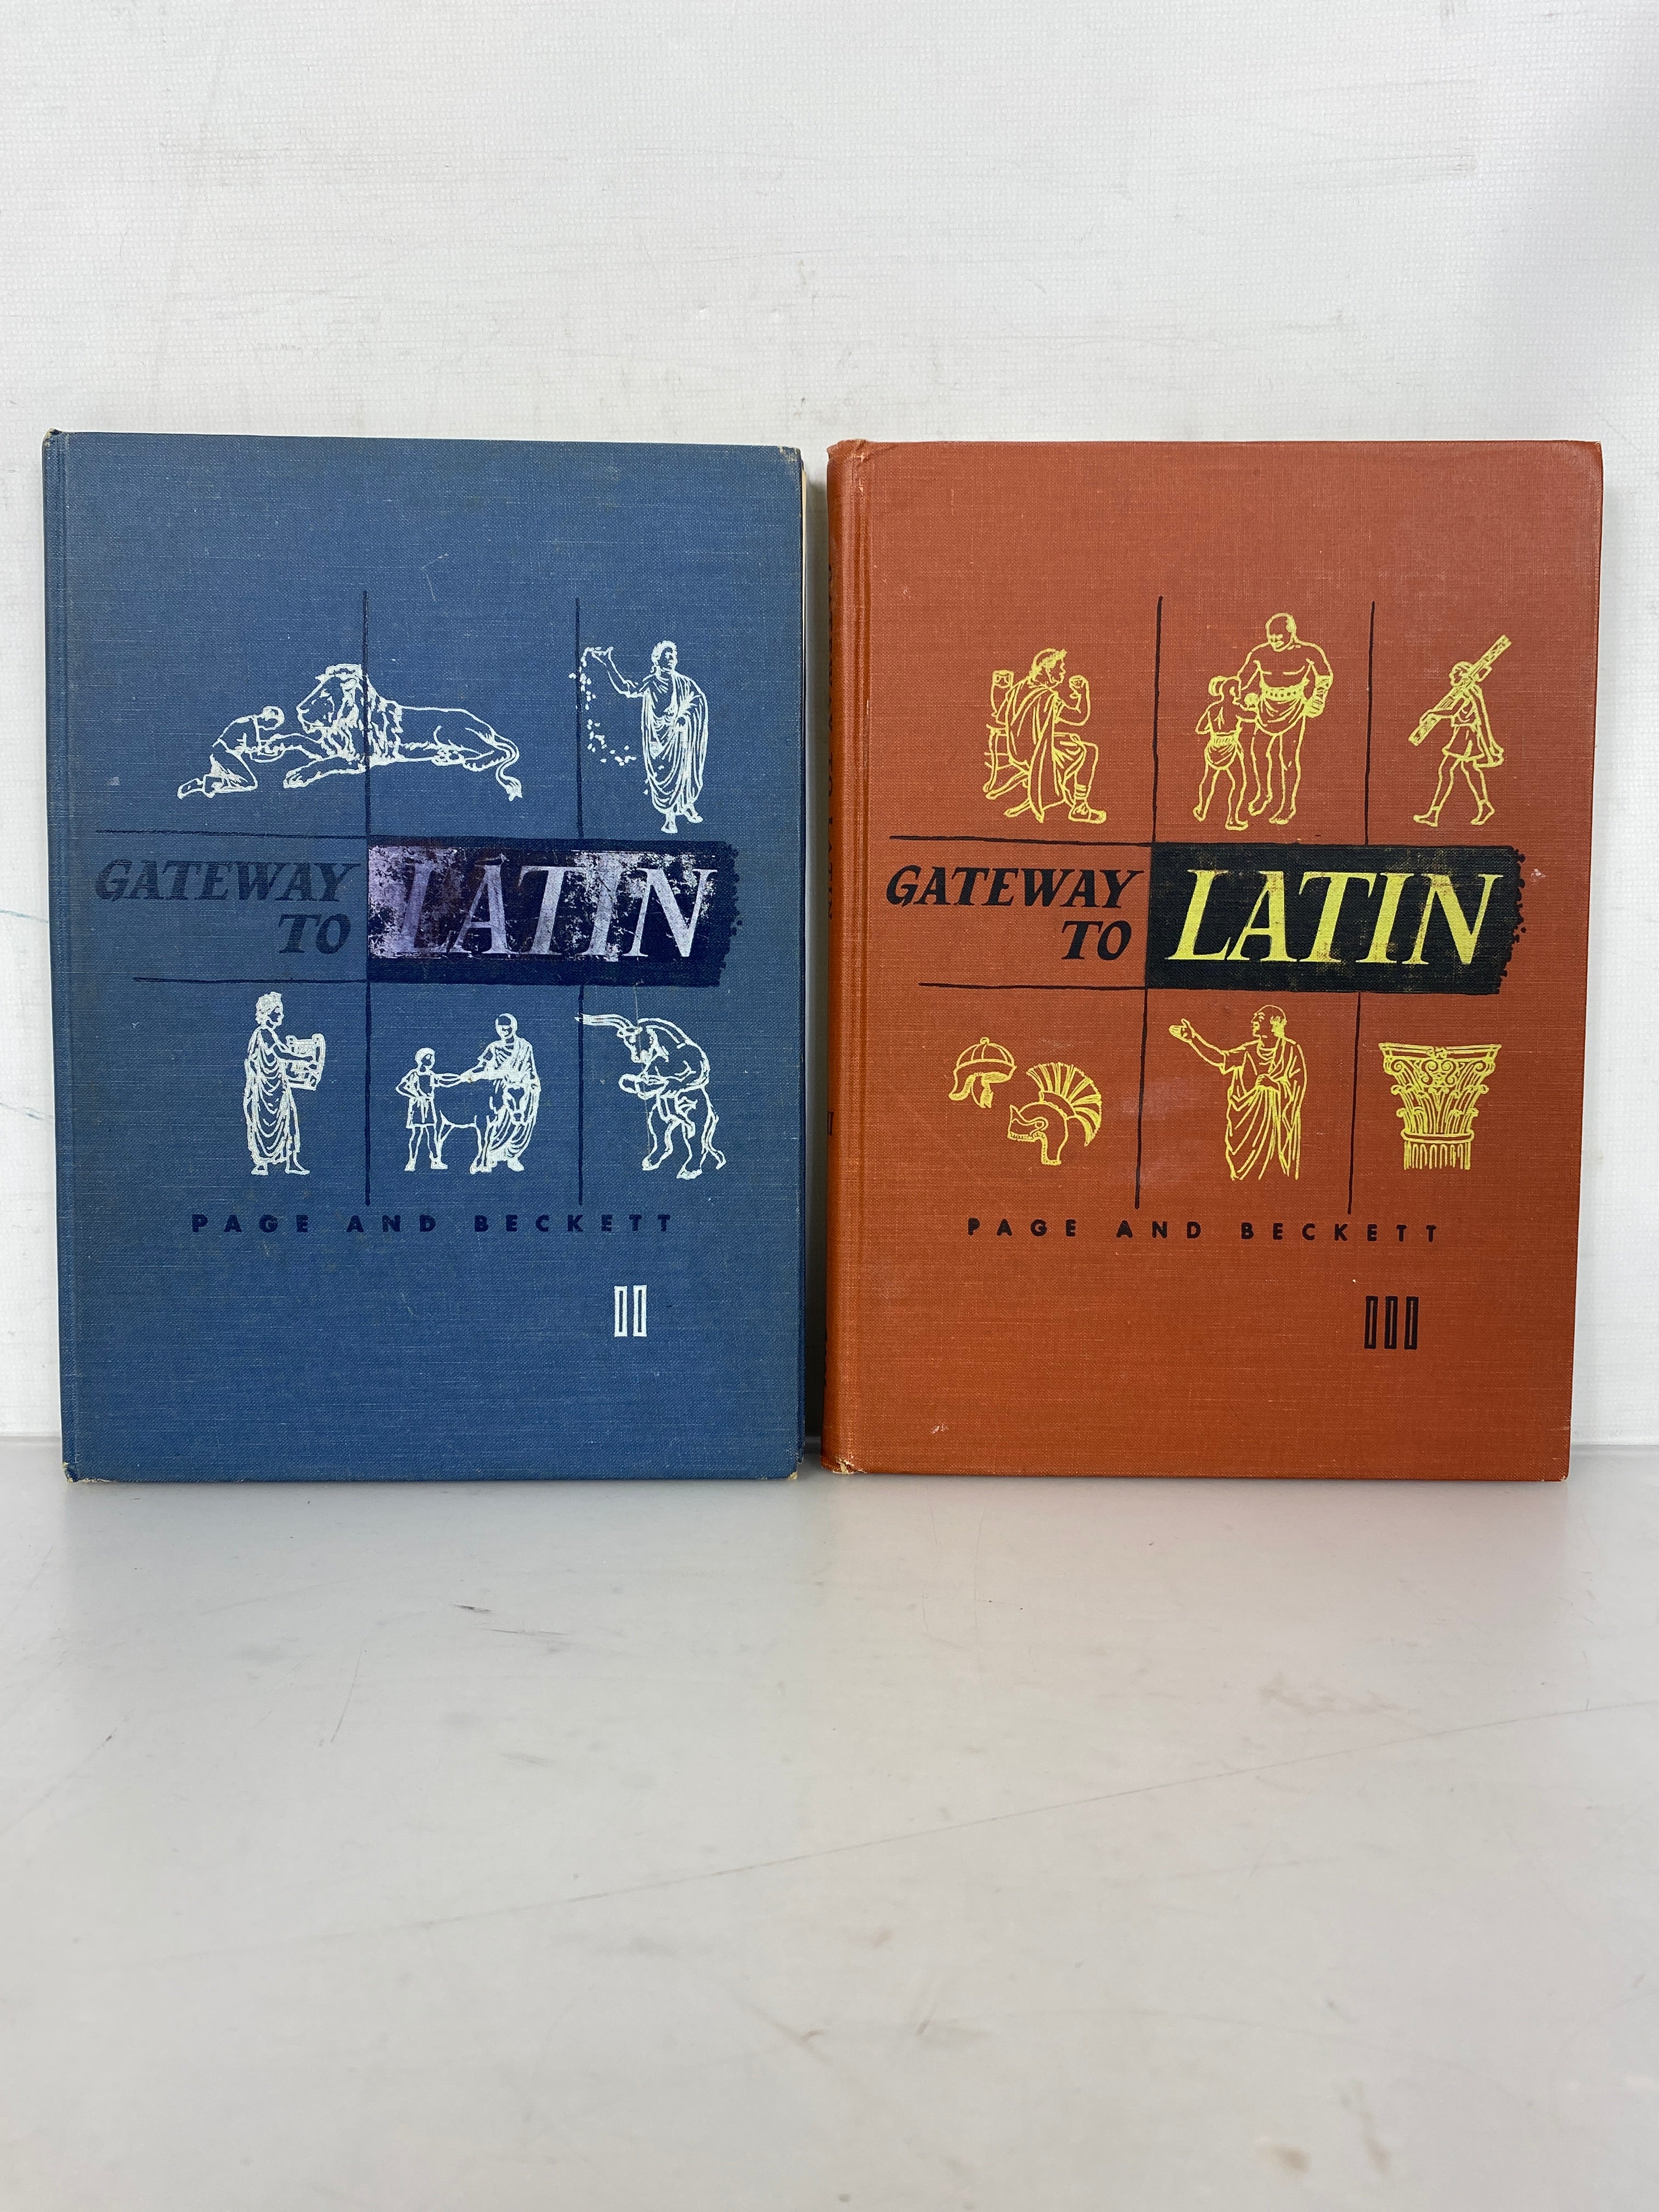 2 Volumes of Gateway To Latin (II and III) by Page and Beckett 1953-1954 HC